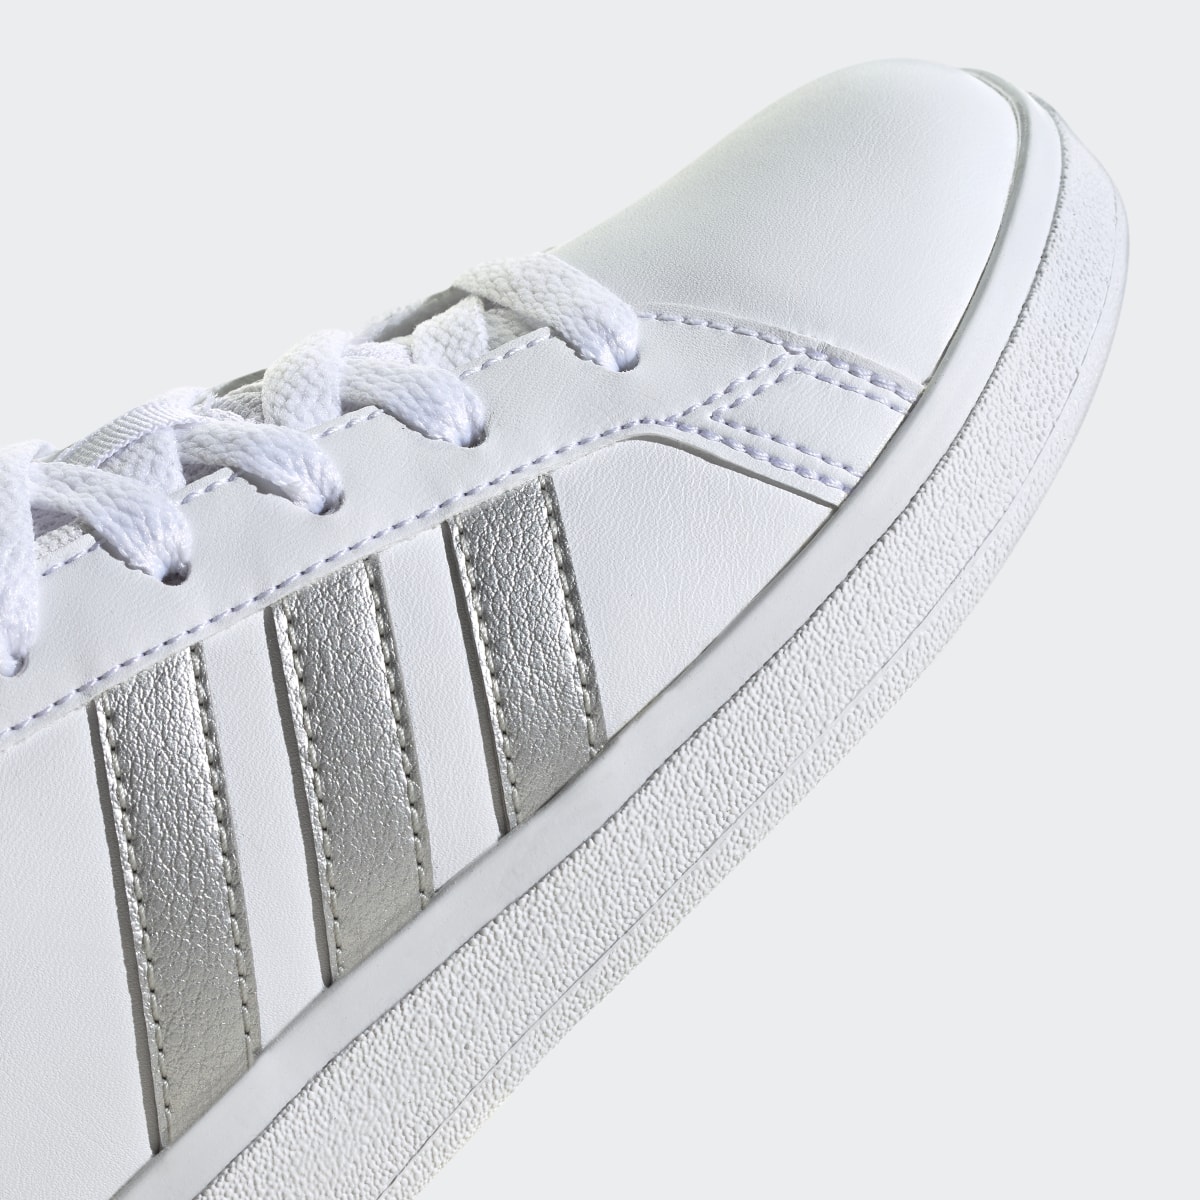 Adidas Chaussure Grand Court Lifestyle Tennis Lace-Up. 9